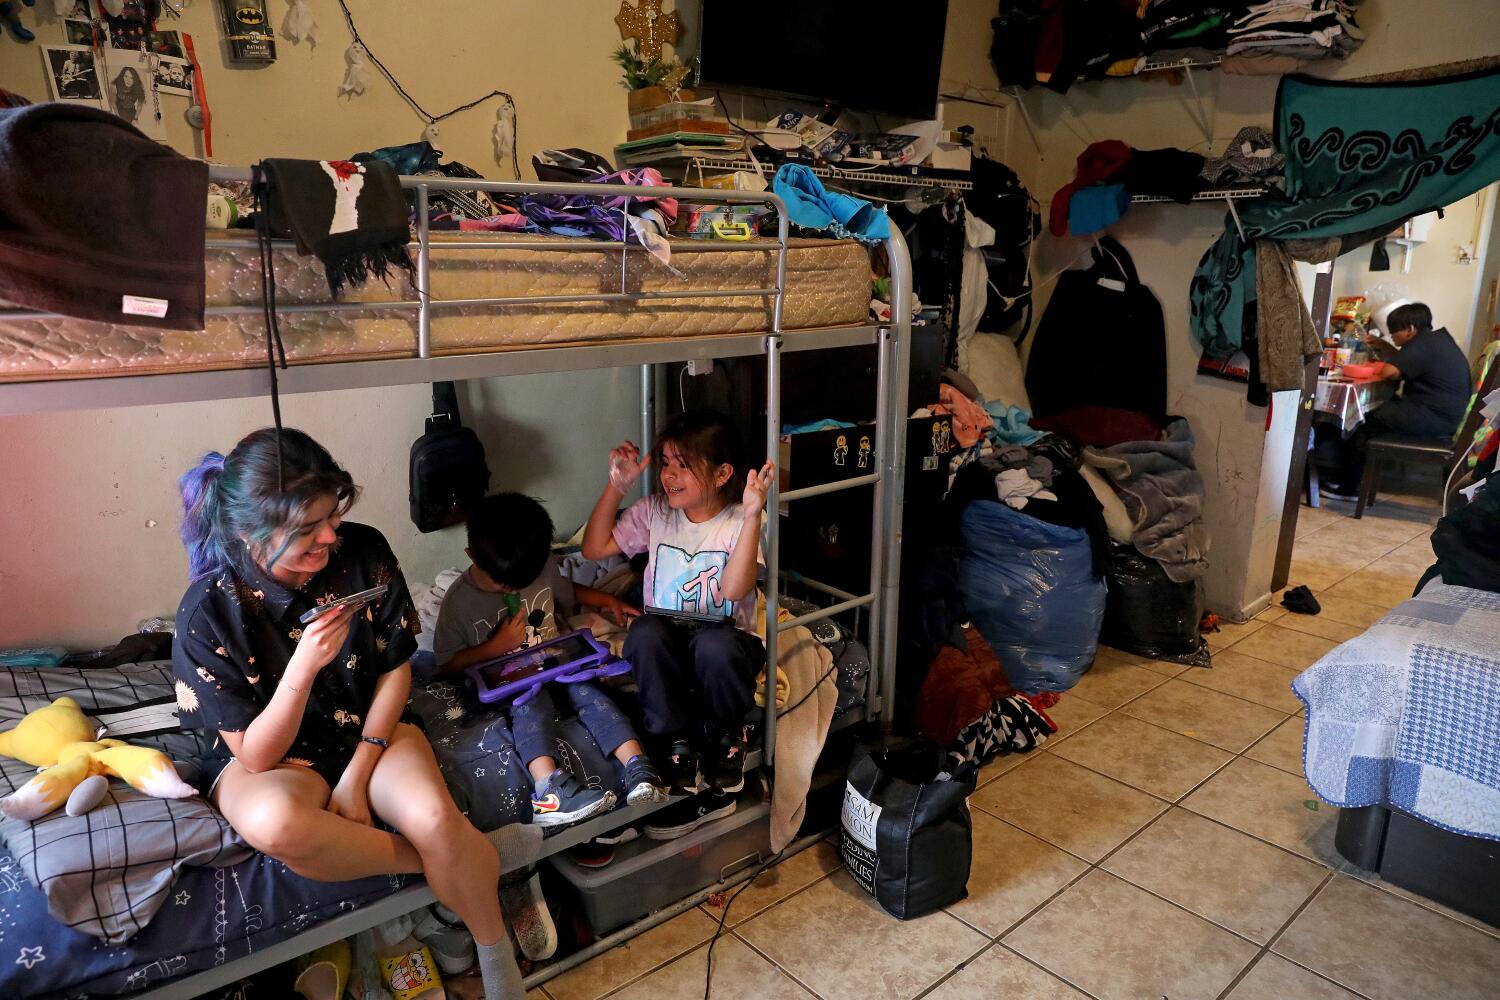 Renters across L.A. are under strain and many fear becoming homeless, survey finds